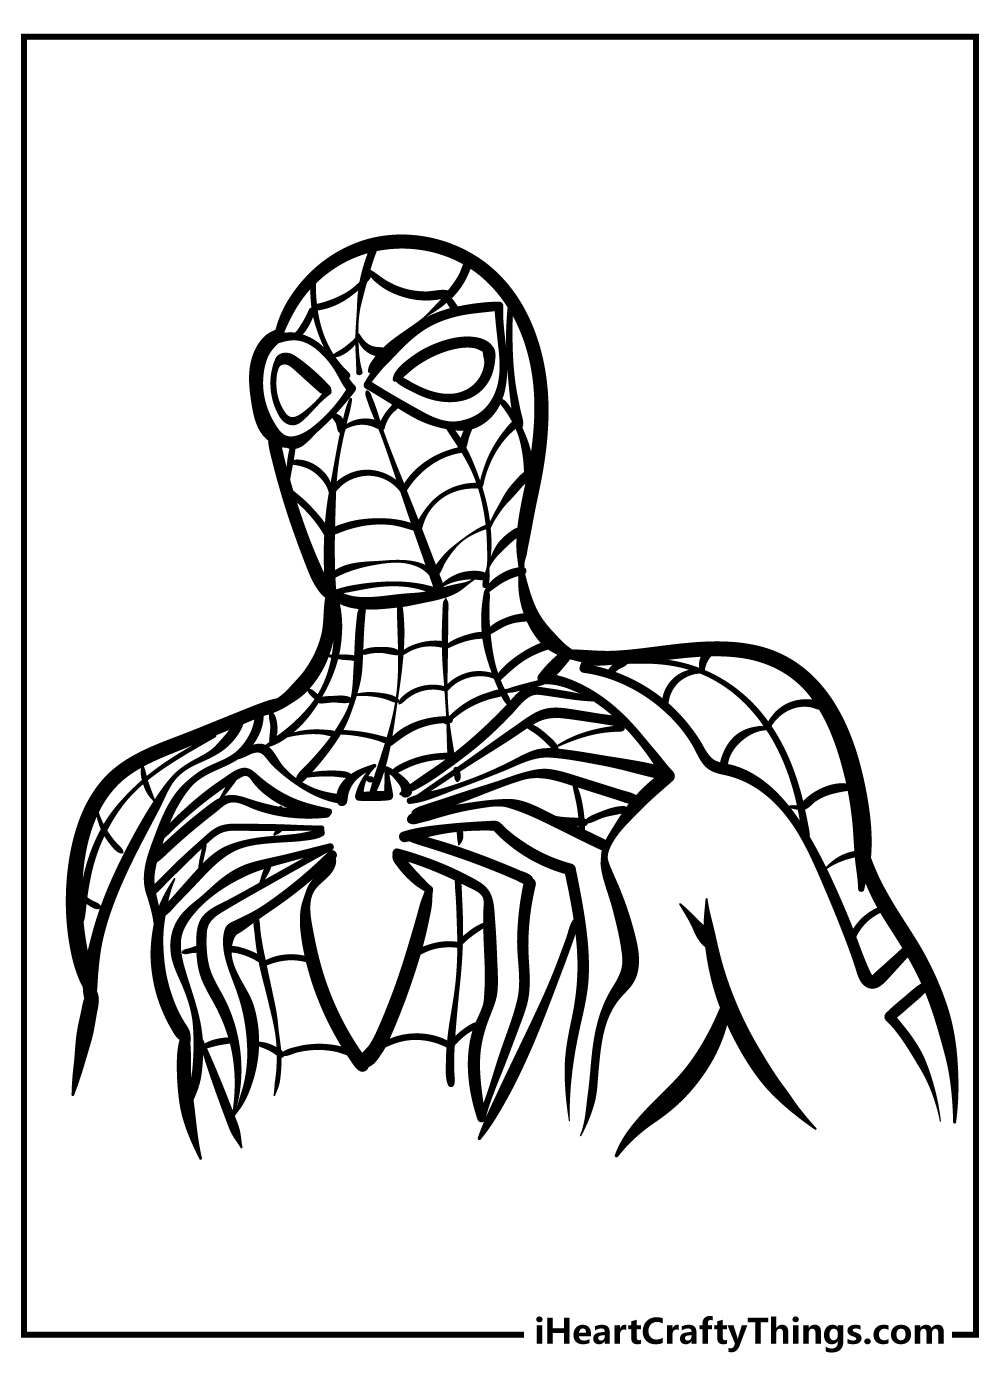 Spiderman Christmas Coloring Pages Inspiring